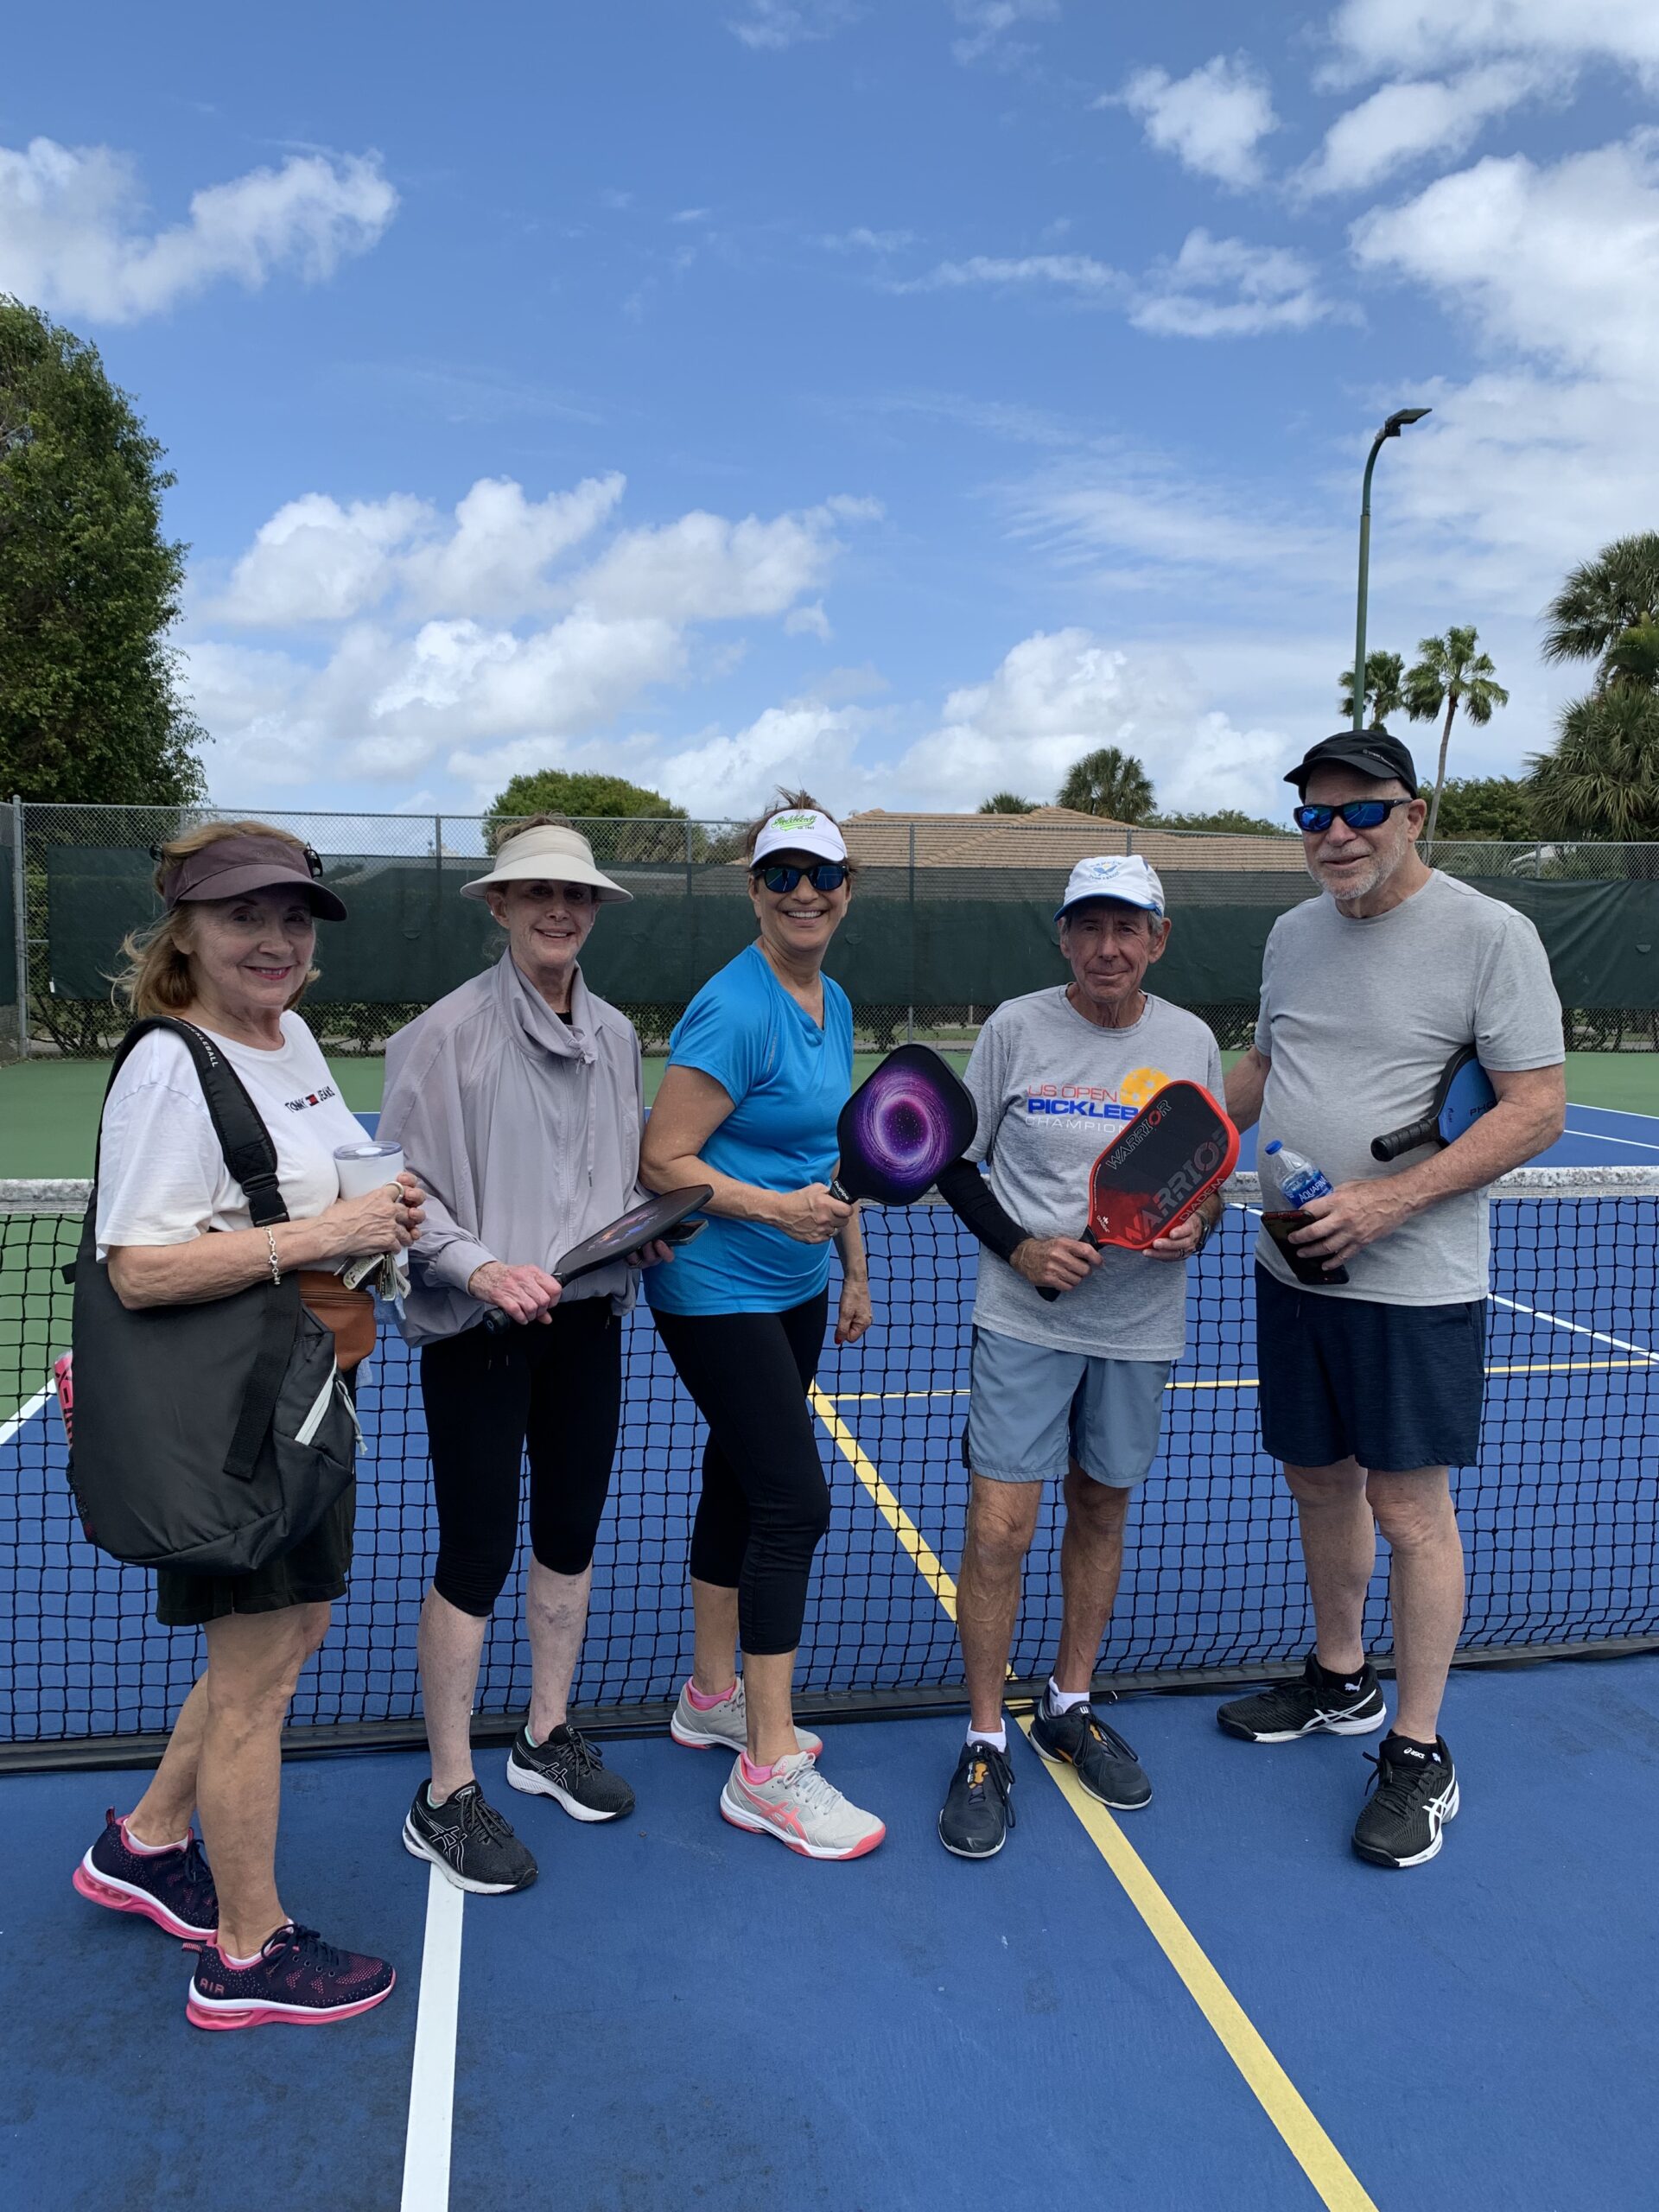 bob-with-four-of-his-students-denise-teresa-ron-and-margie-after-an-advanced-beginners-pickleball-clinic-in-lake-worth